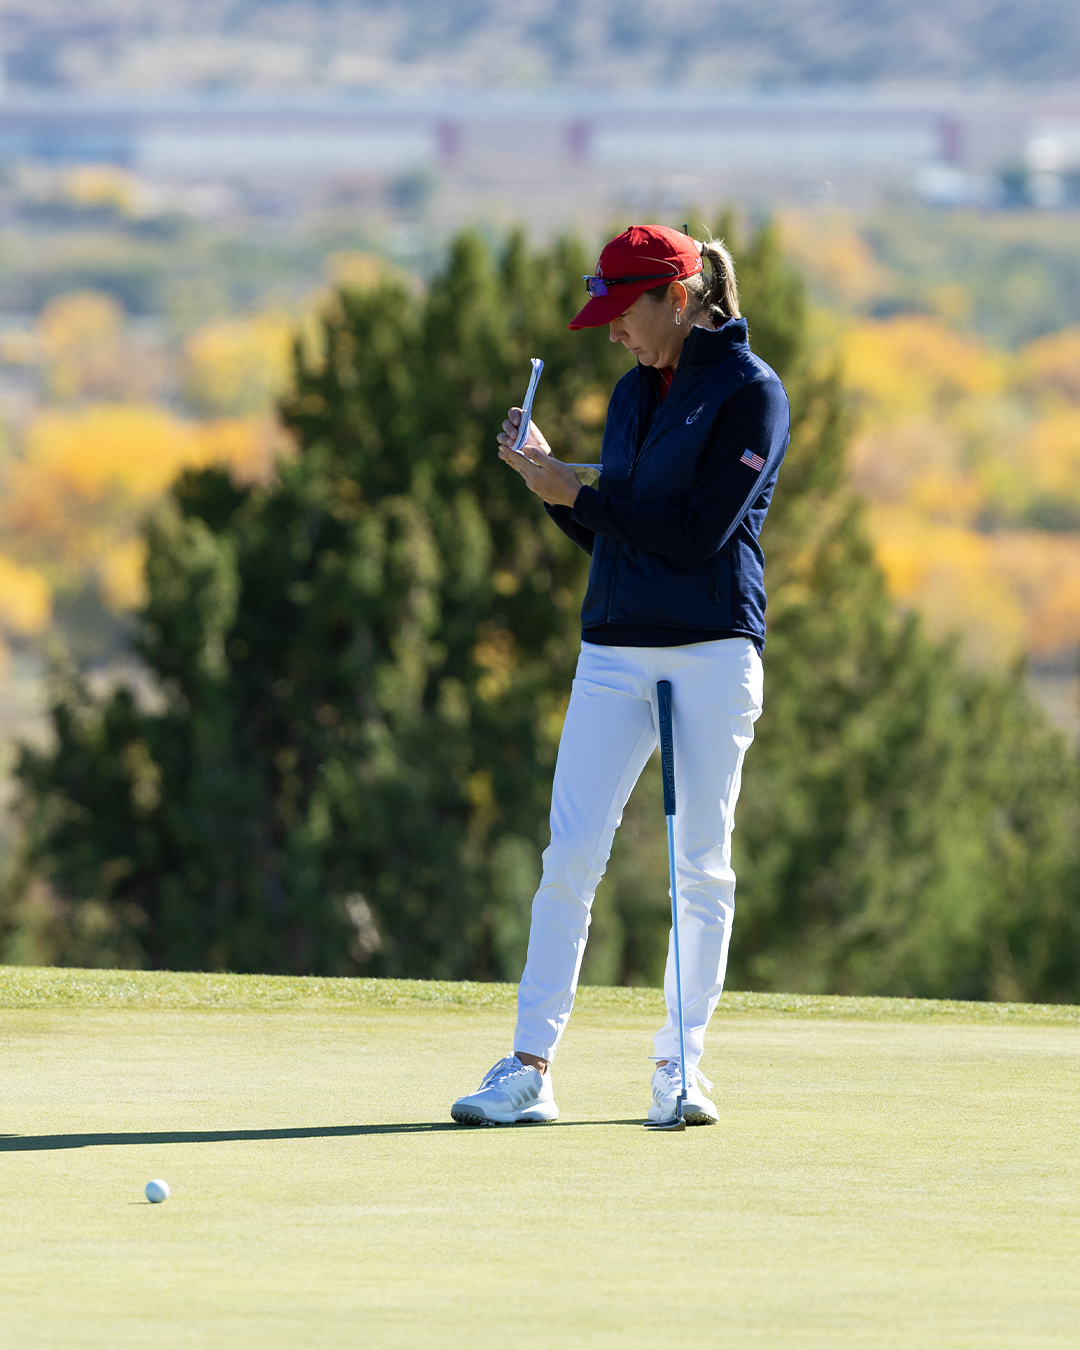 Ashley Grier of the U.S. Team checks her score book during the final round of the 2nd Women's PGA Cup at Twin Warriors Golf Club on Saturday, October 29, 2022 in Santa Ana Pueblo, New Mexico. (Photo by Sam Greenwood/PGA of America)